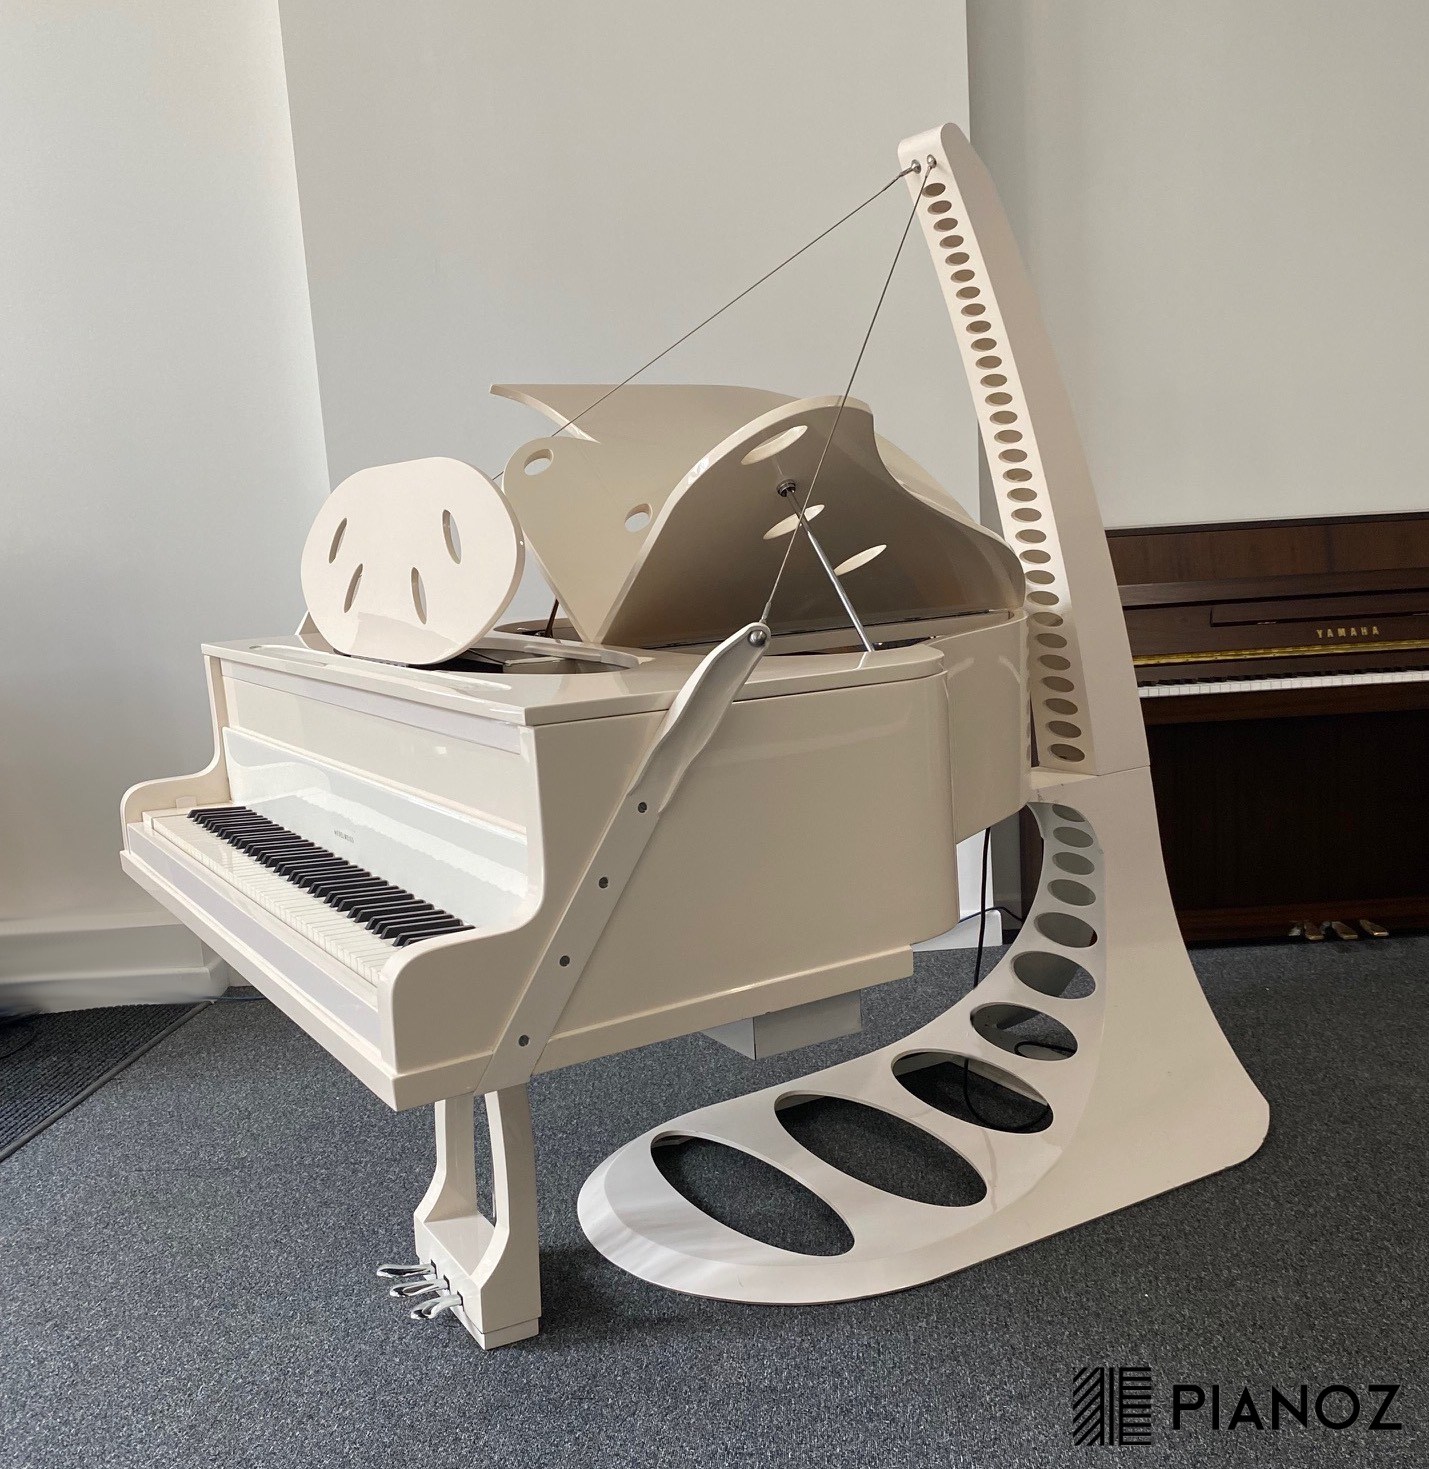 Edelweiss Pianodisc Self Playing Baby Grand Piano piano for sale in UK